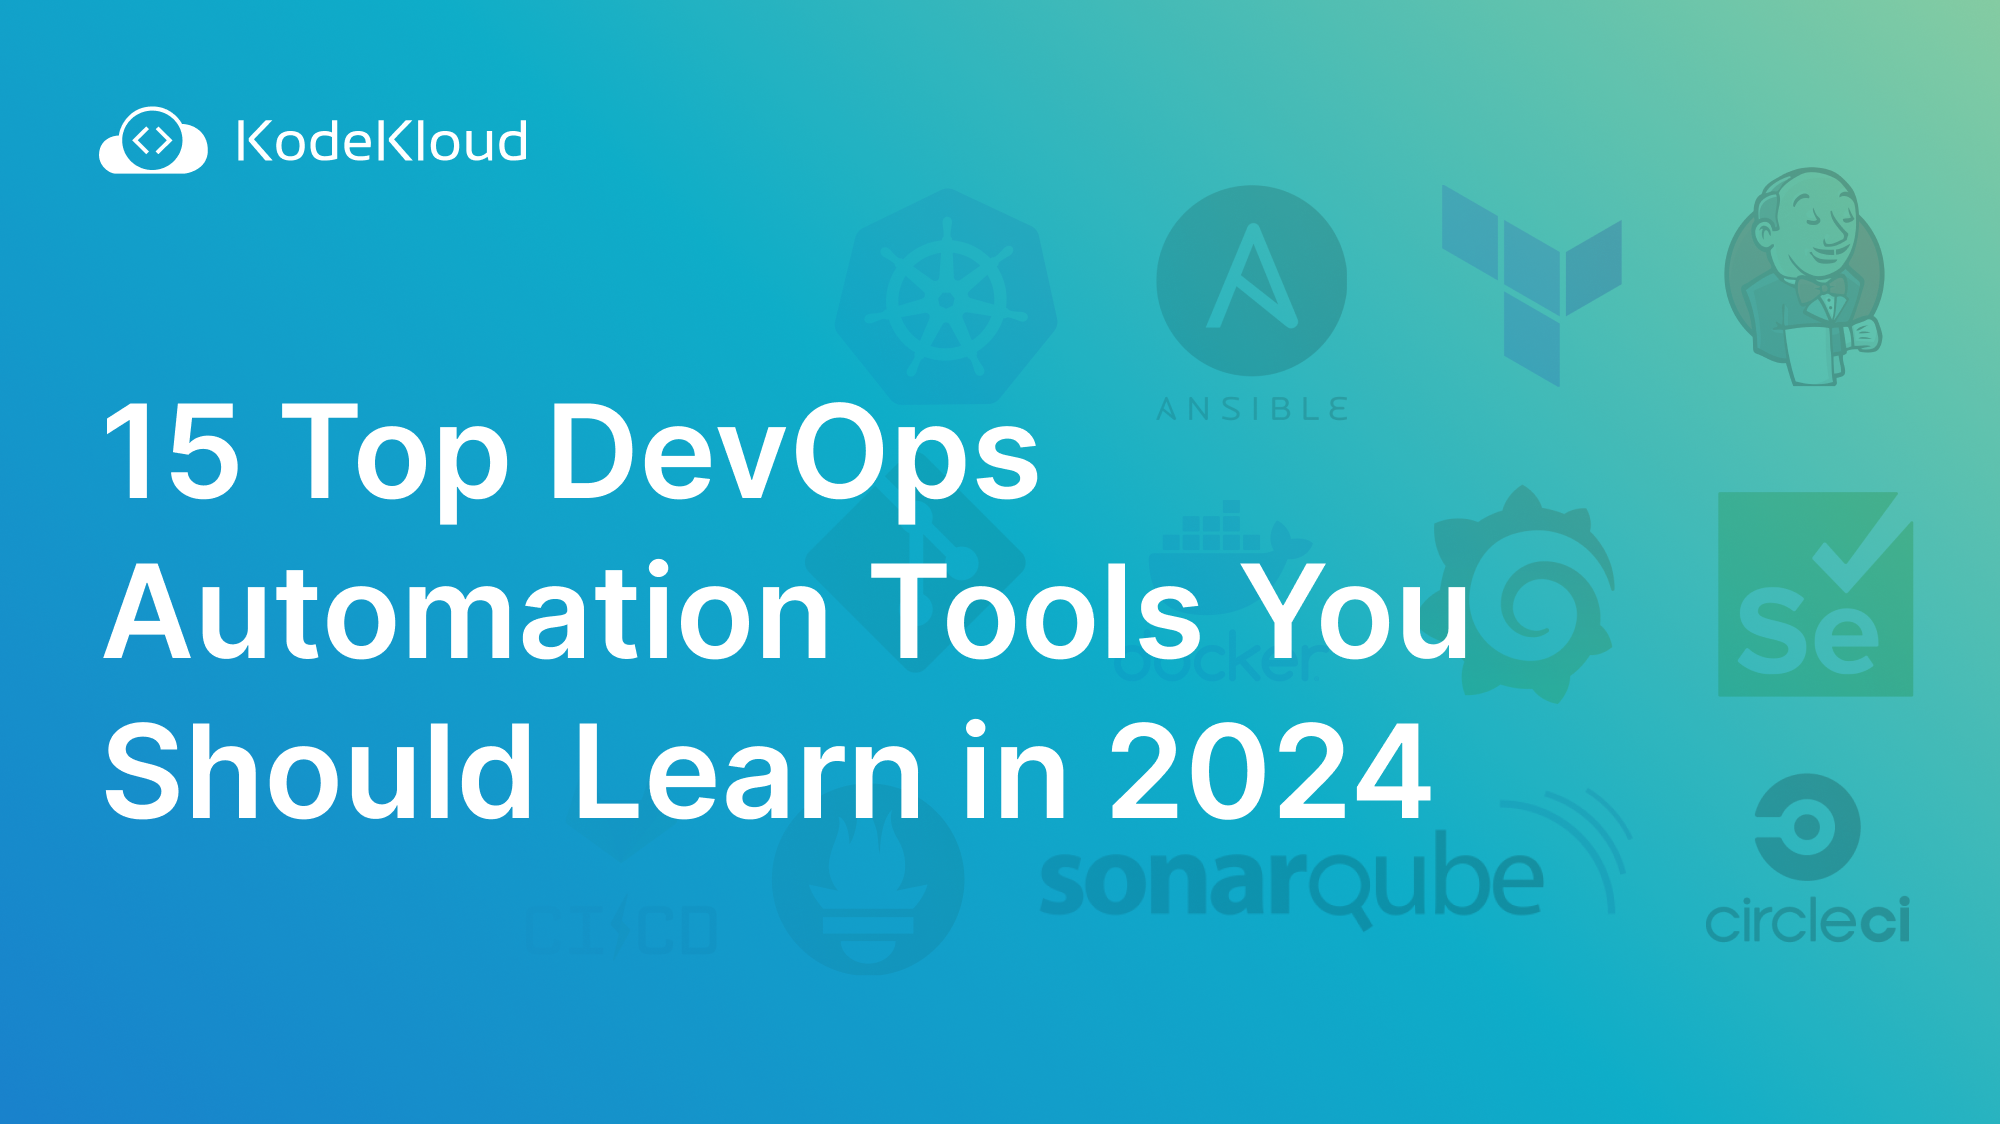 Top 15 DevOps Automation Tools You Should Learn in 2024